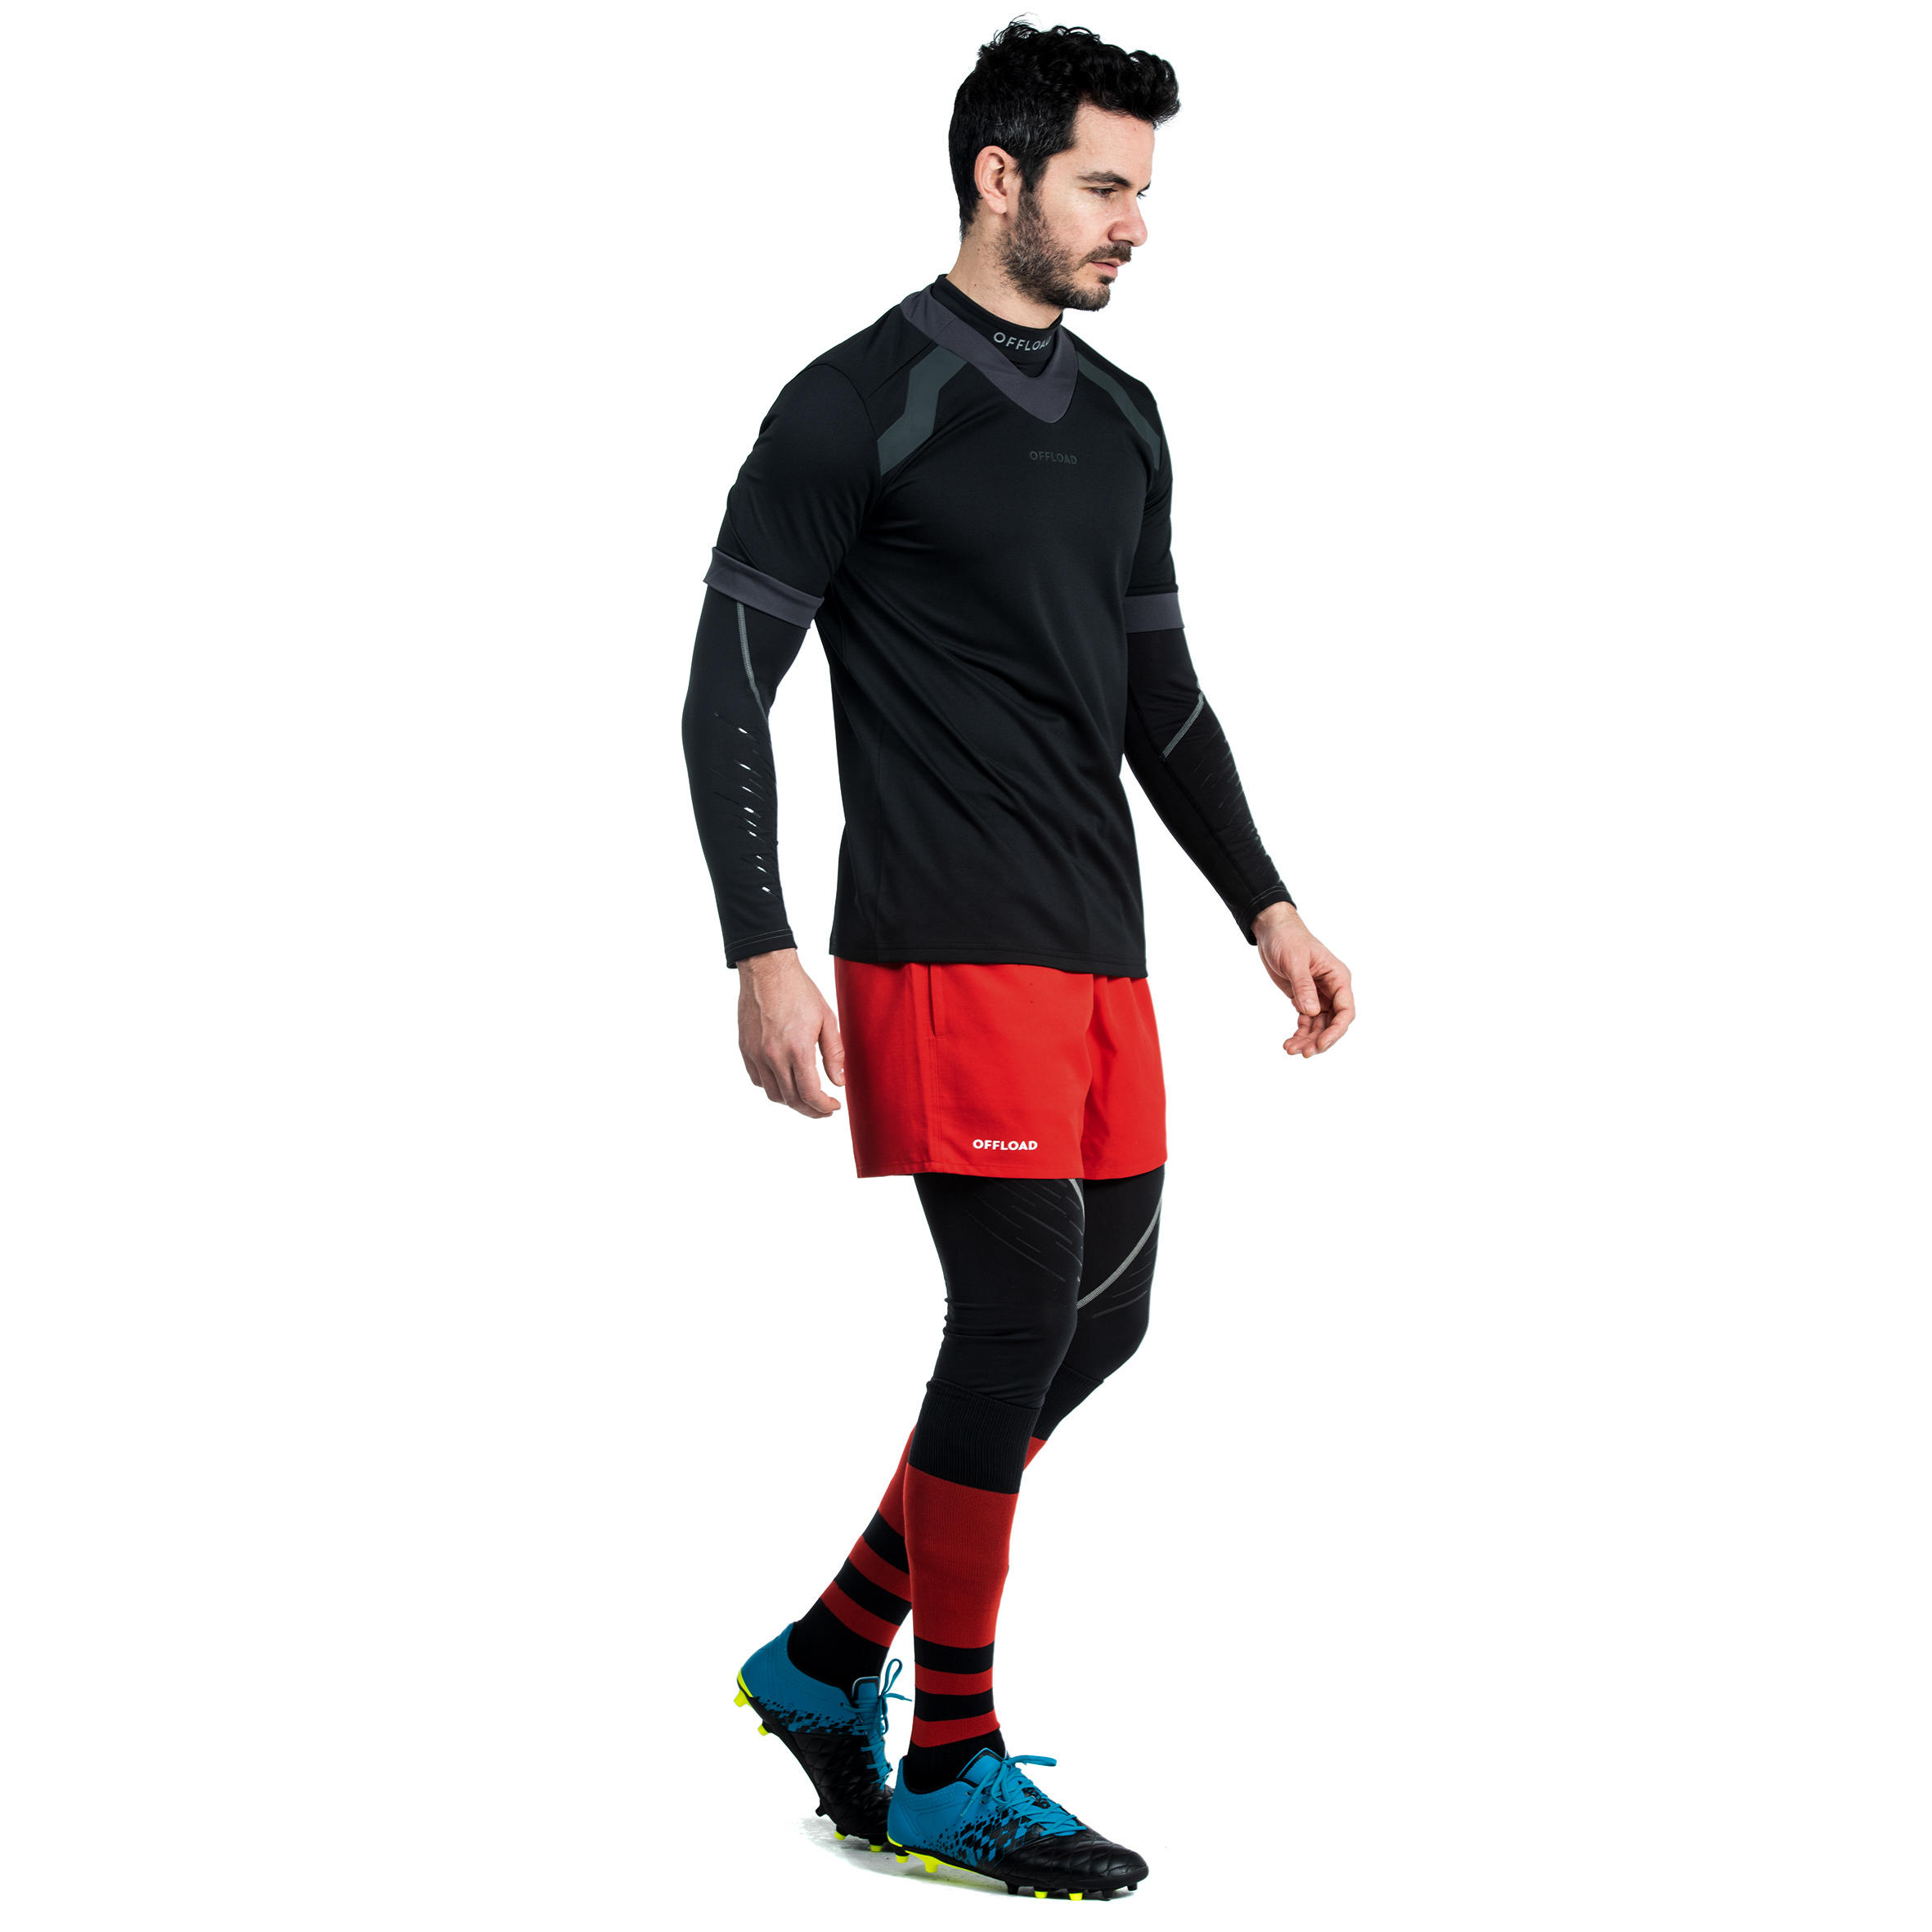 Men's Long-Sleeved Rugby Base Layer Top R500 - Black 8/10